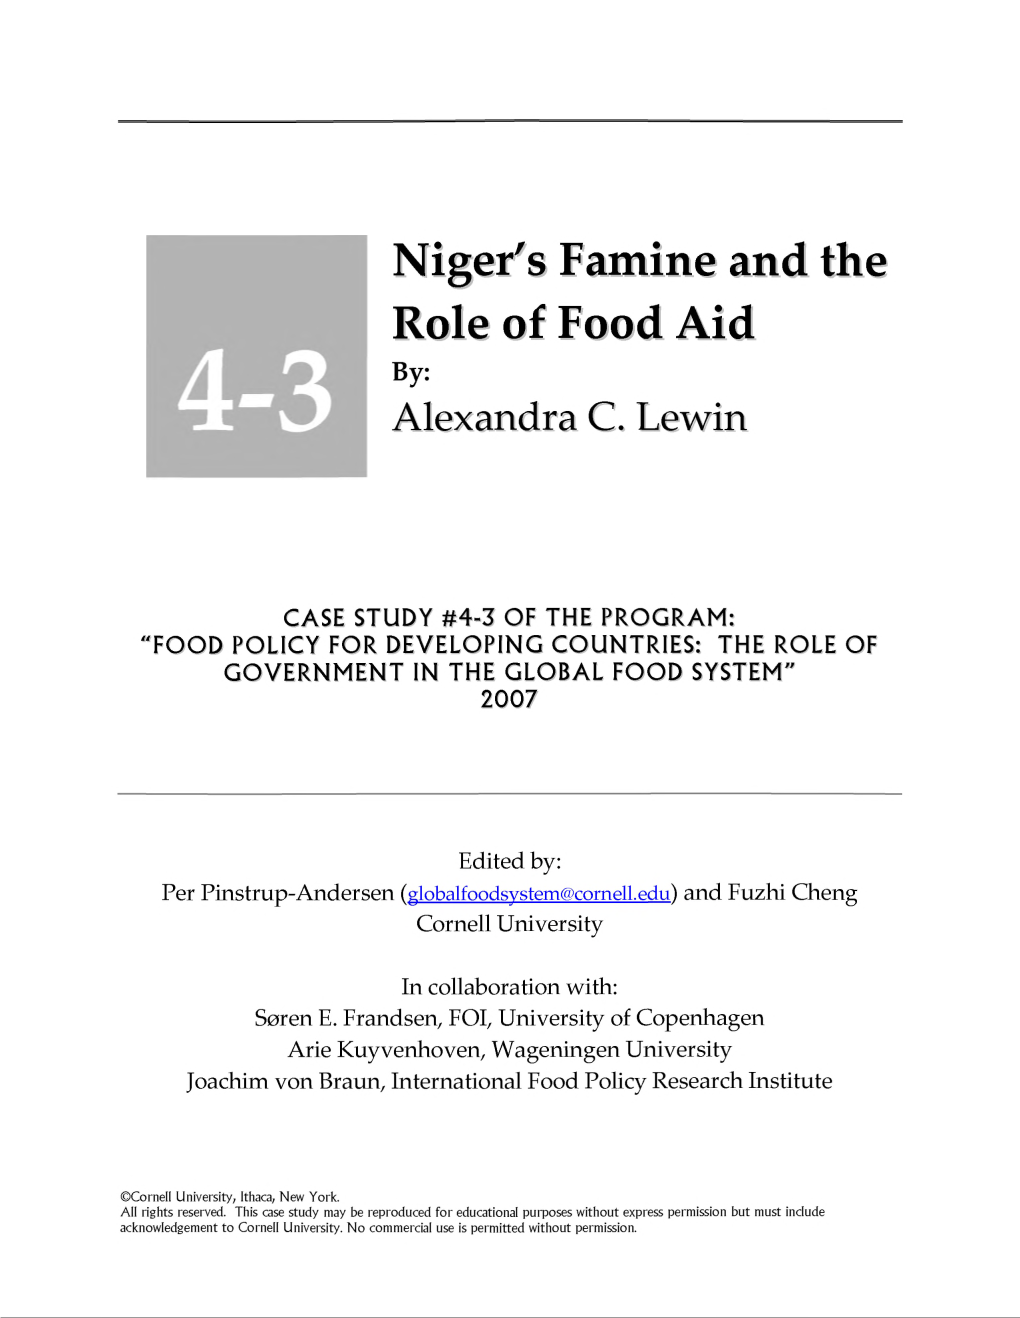 Niger's Famine and the Role of Food Aid By: Alexandra C